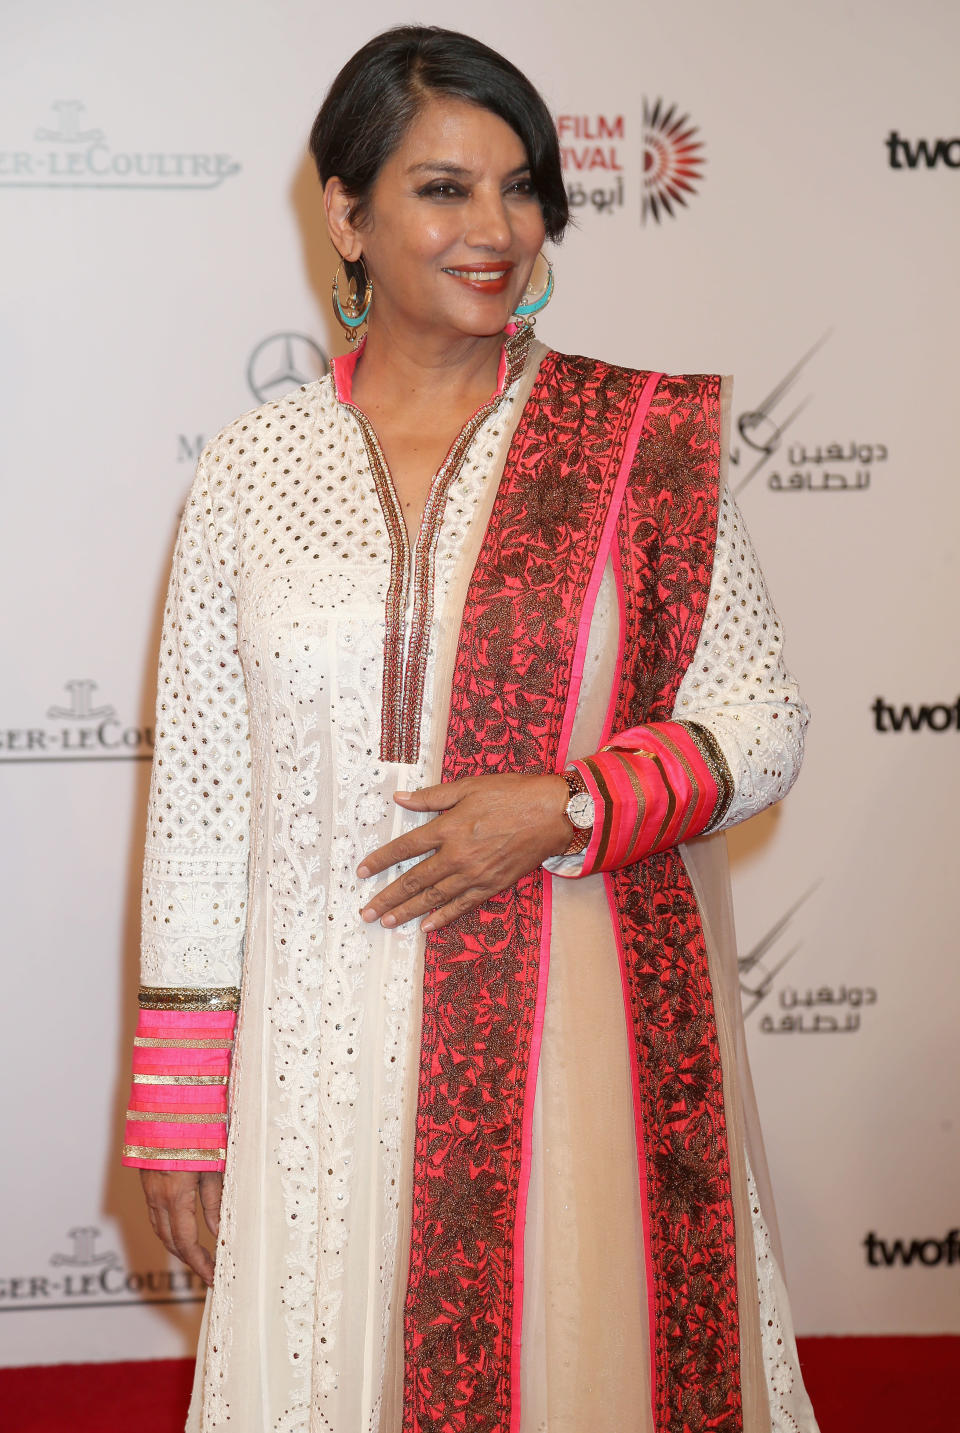 ABU DHABI, UNITED ARAB EMIRATES - OCTOBER 11: Shabana Azmi attends day one of the Abu Dhabi Film Festival 2012 at Emirates Palace on October 11, 2012 in Abu Dhabi, United Arab Emirates. (Photo by Chris Jackson/Getty Images for Jaeger-LeCoultre)